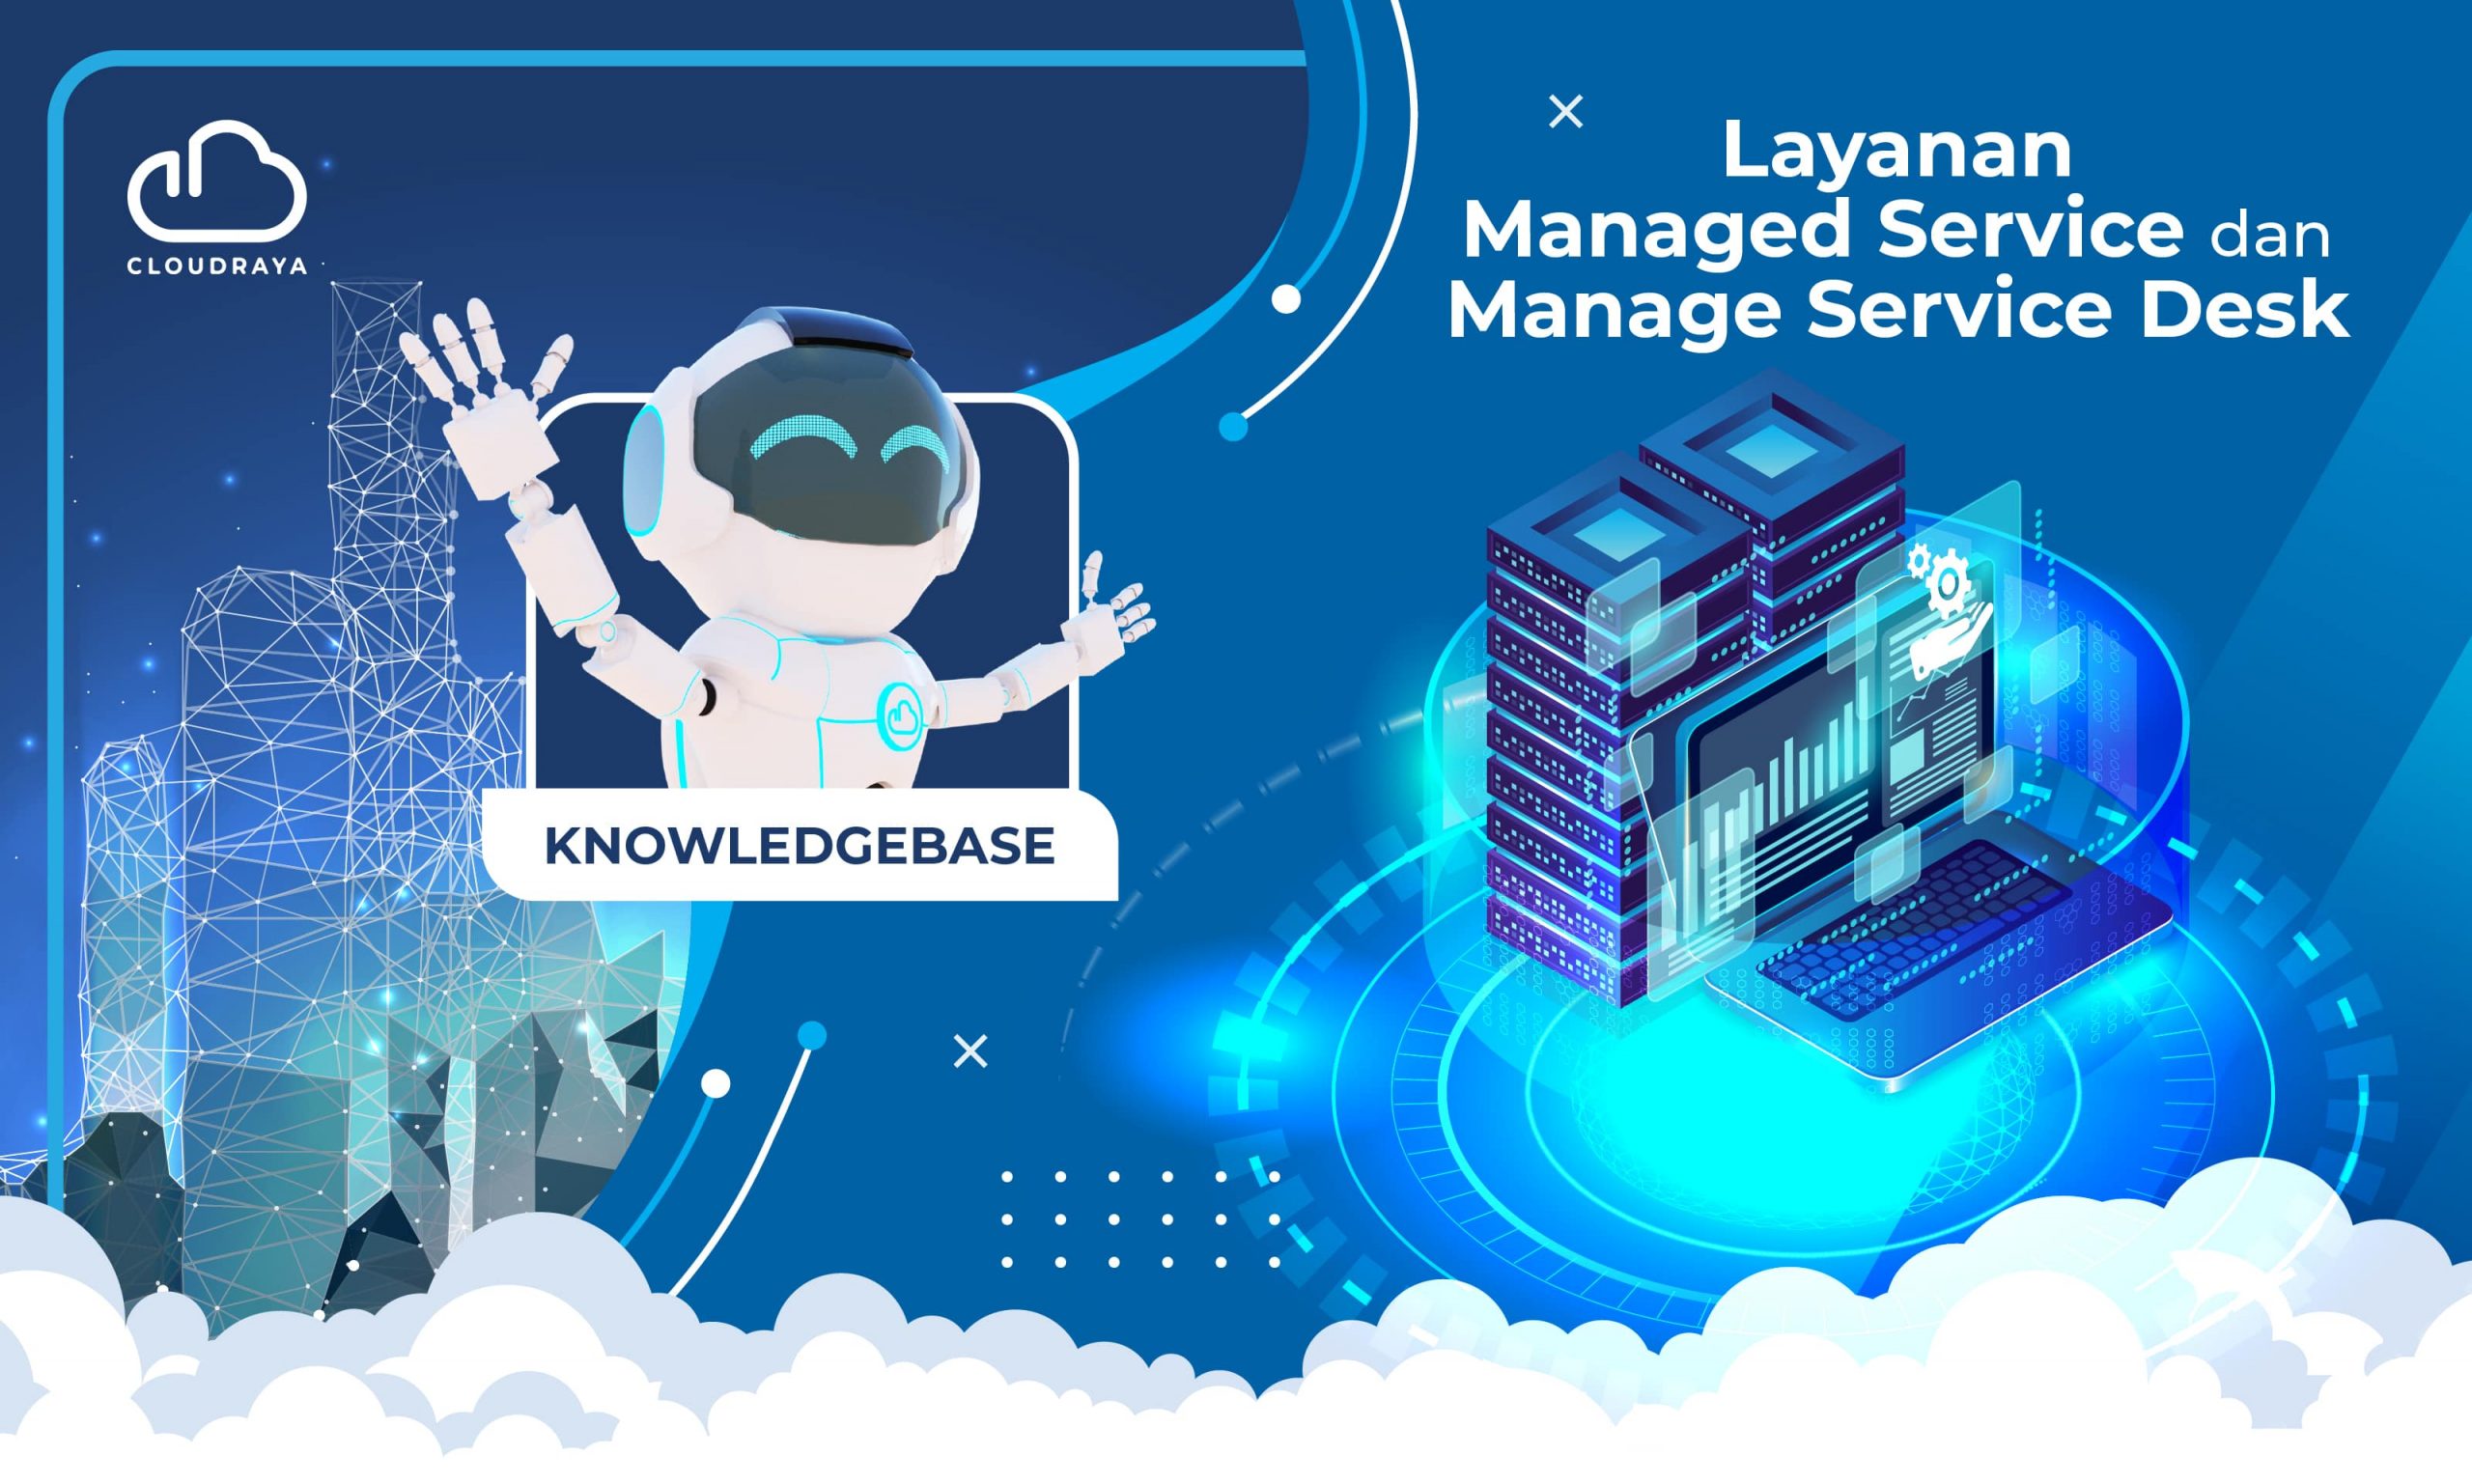 Layanan Managed Service